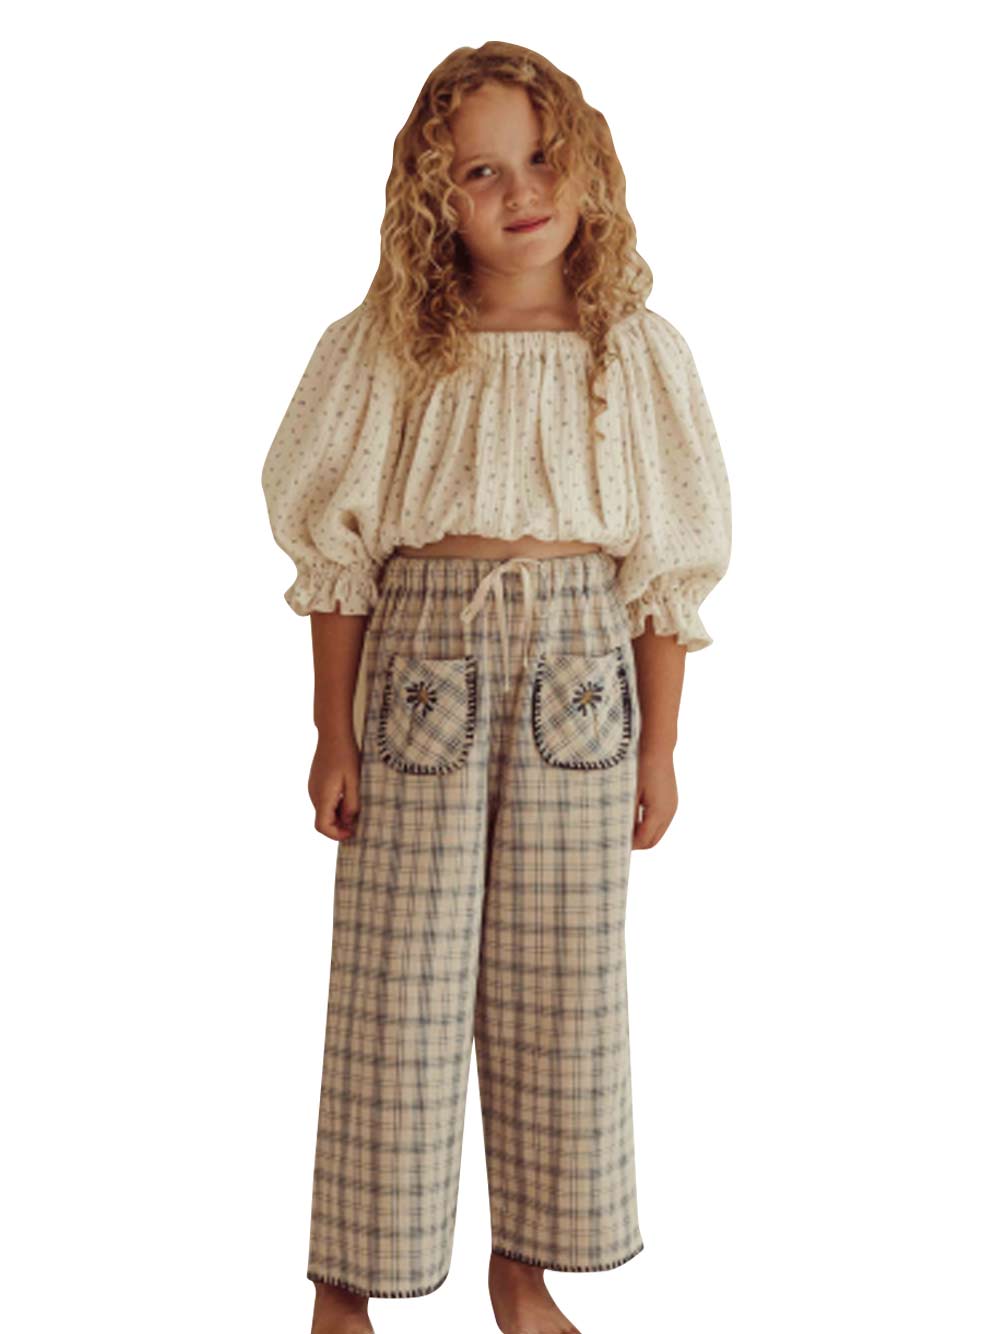 Lilo Pants - Shan and Toad - Luxury Kidswear Shop